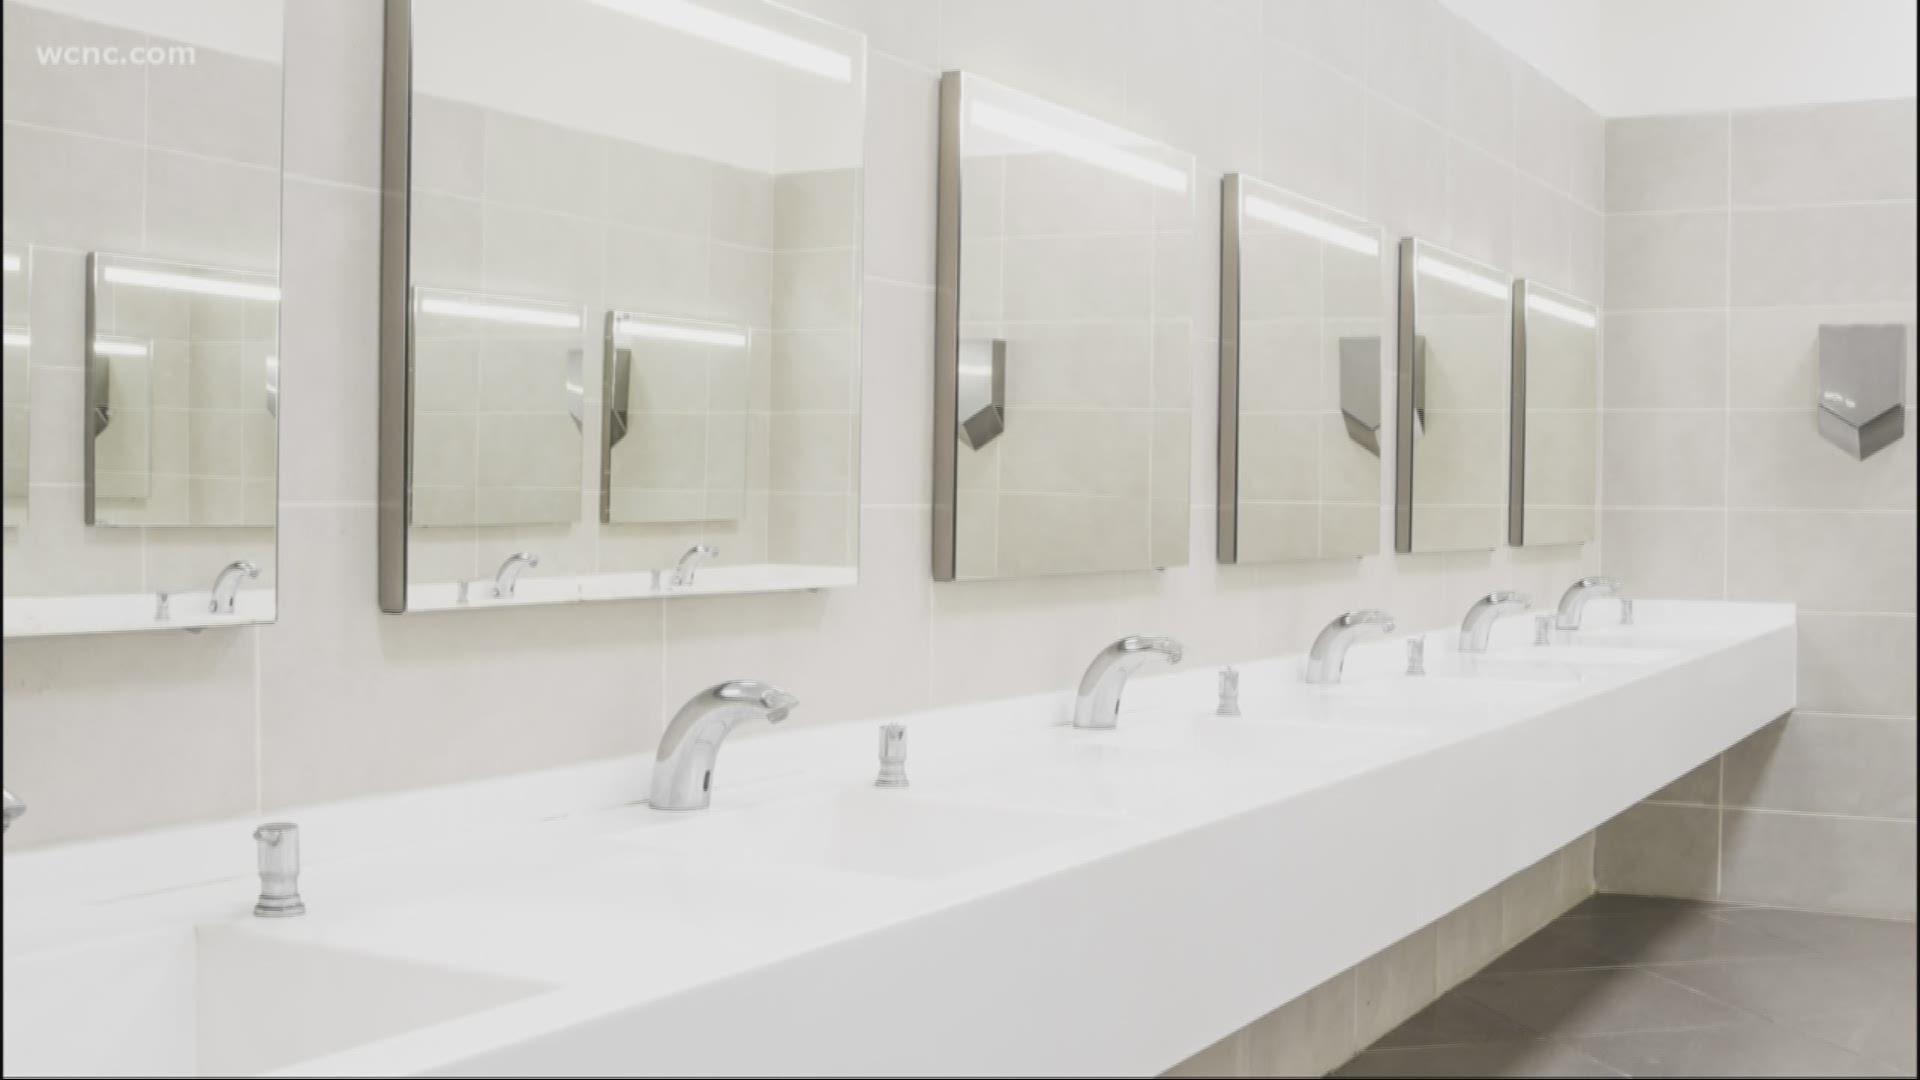 According to a new survey, the top reason people go to public restrooms isn't to actually use it. It's to primp themselves in their mirror. And the worst things about a public restroom are unflushed toilets and no toilet paper.